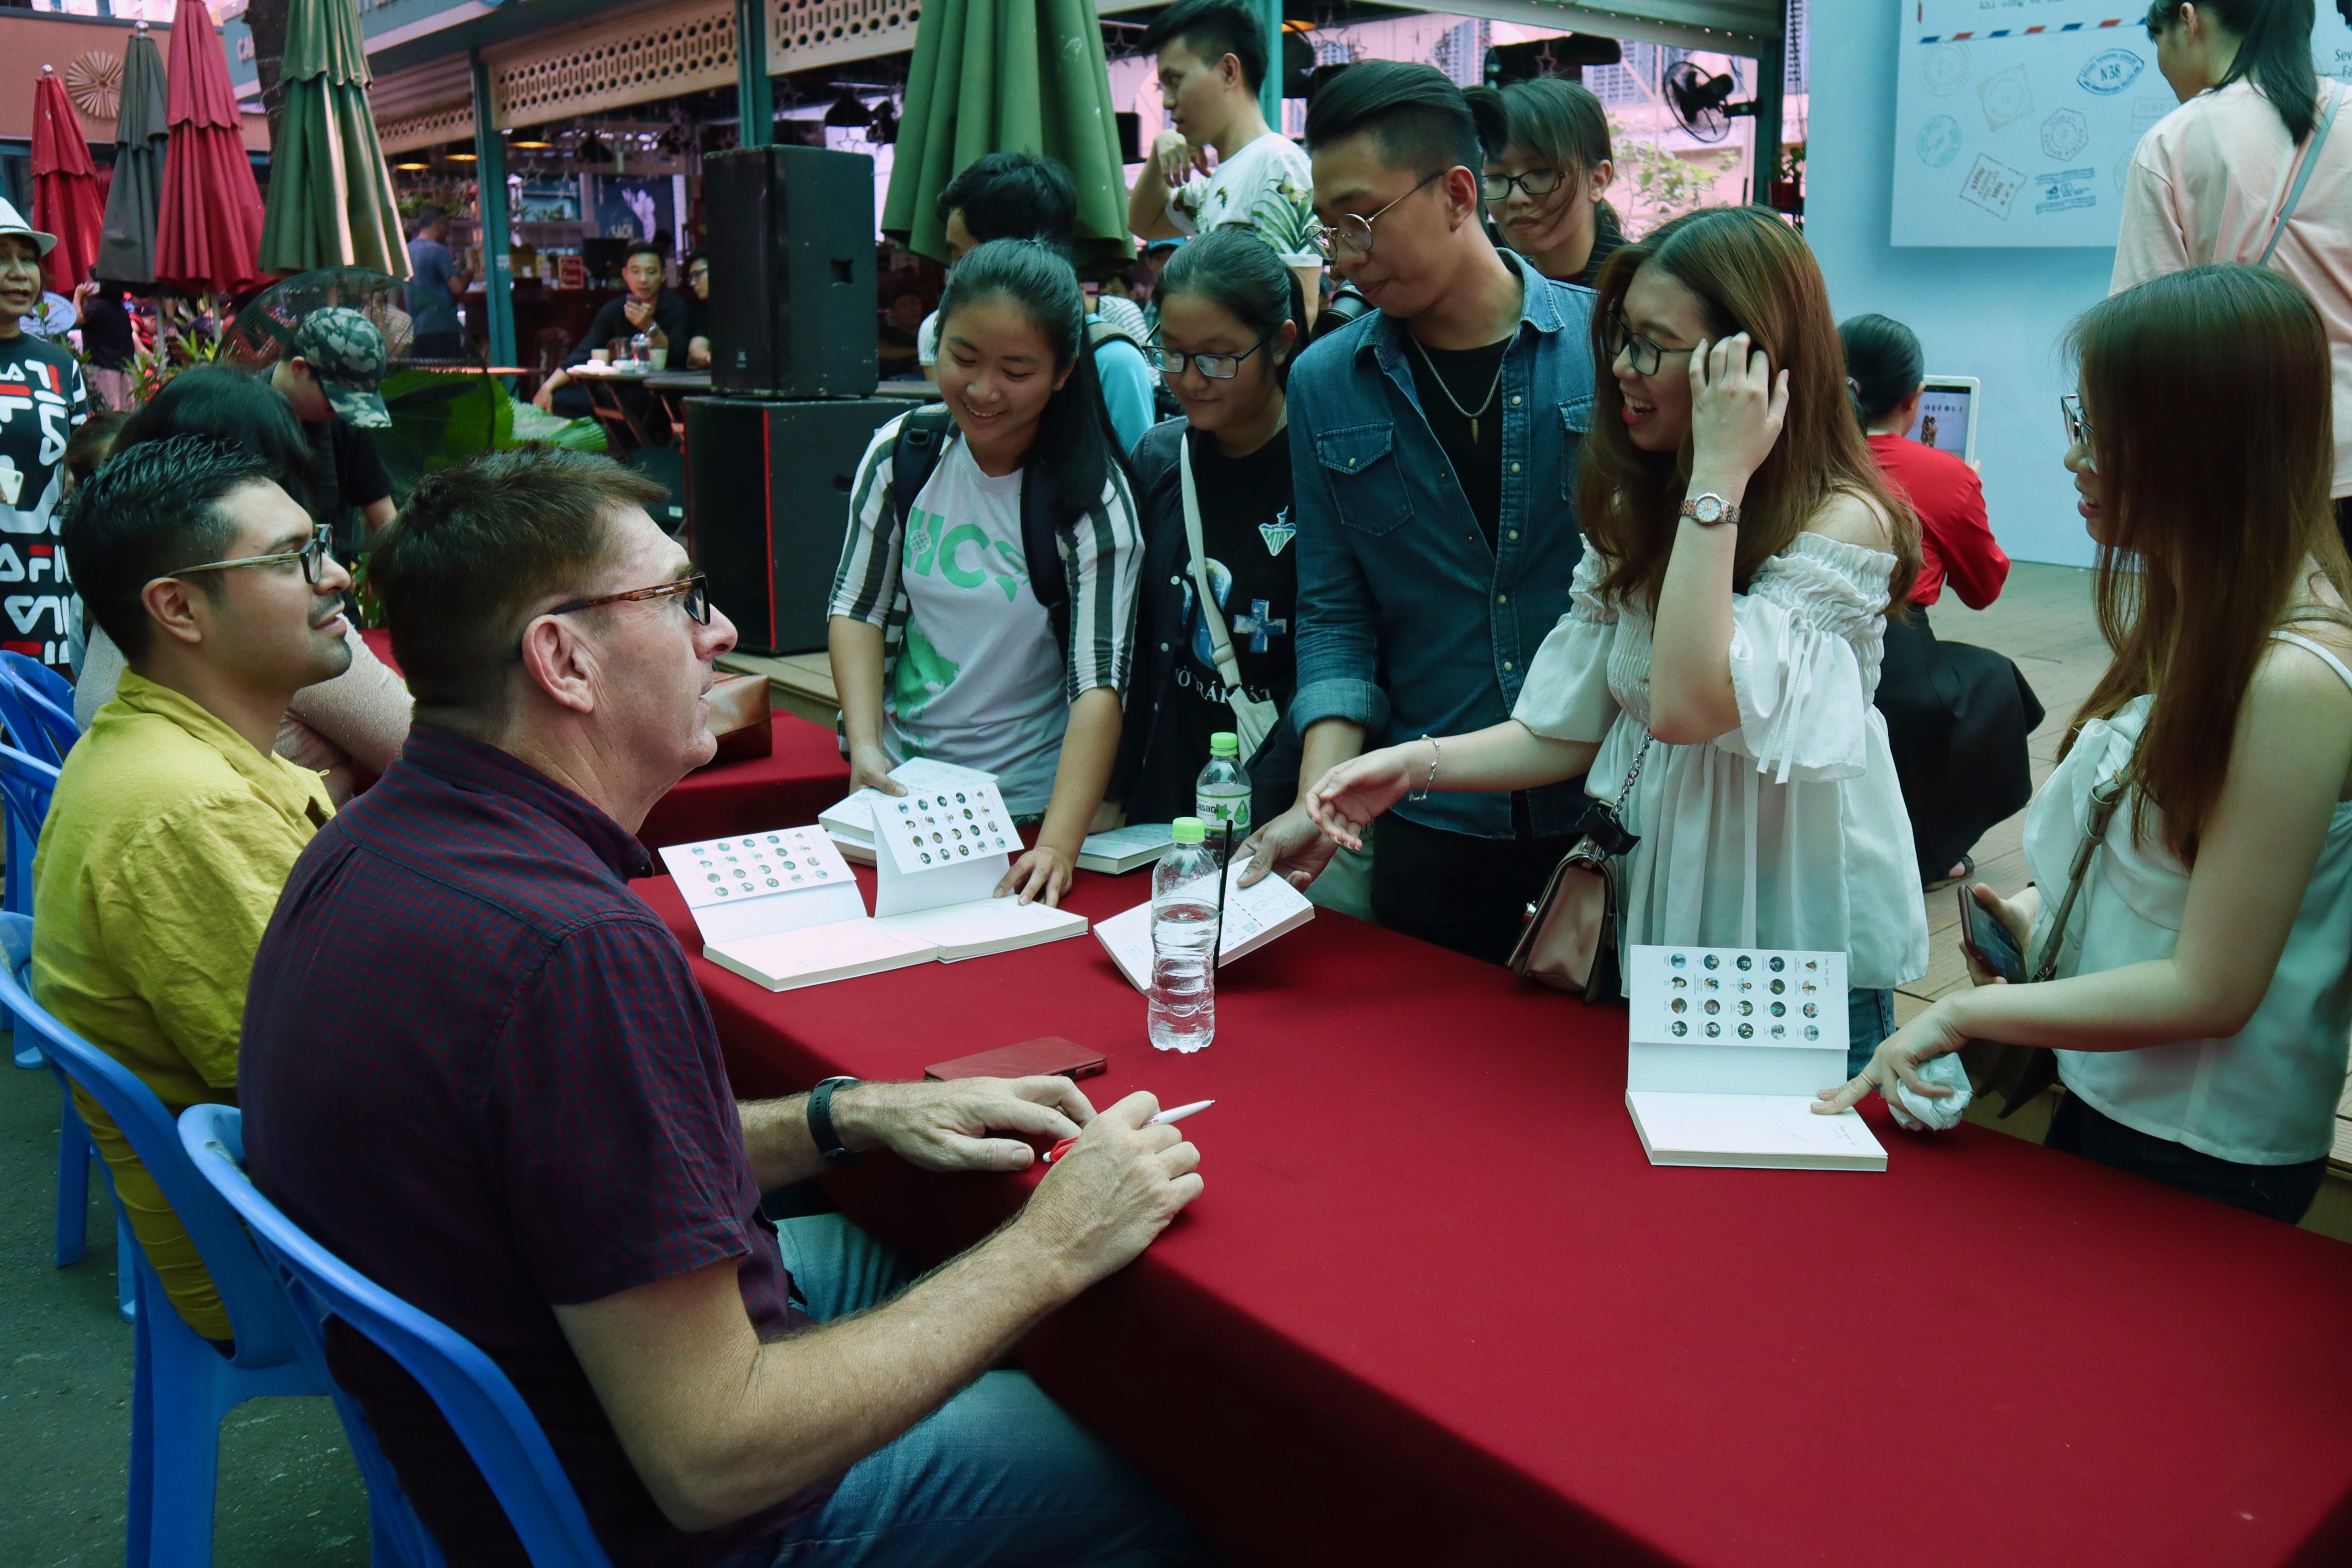 Readers come to the book presentation event to have their books signed. Photo: Ha My / Tuoi Tre News